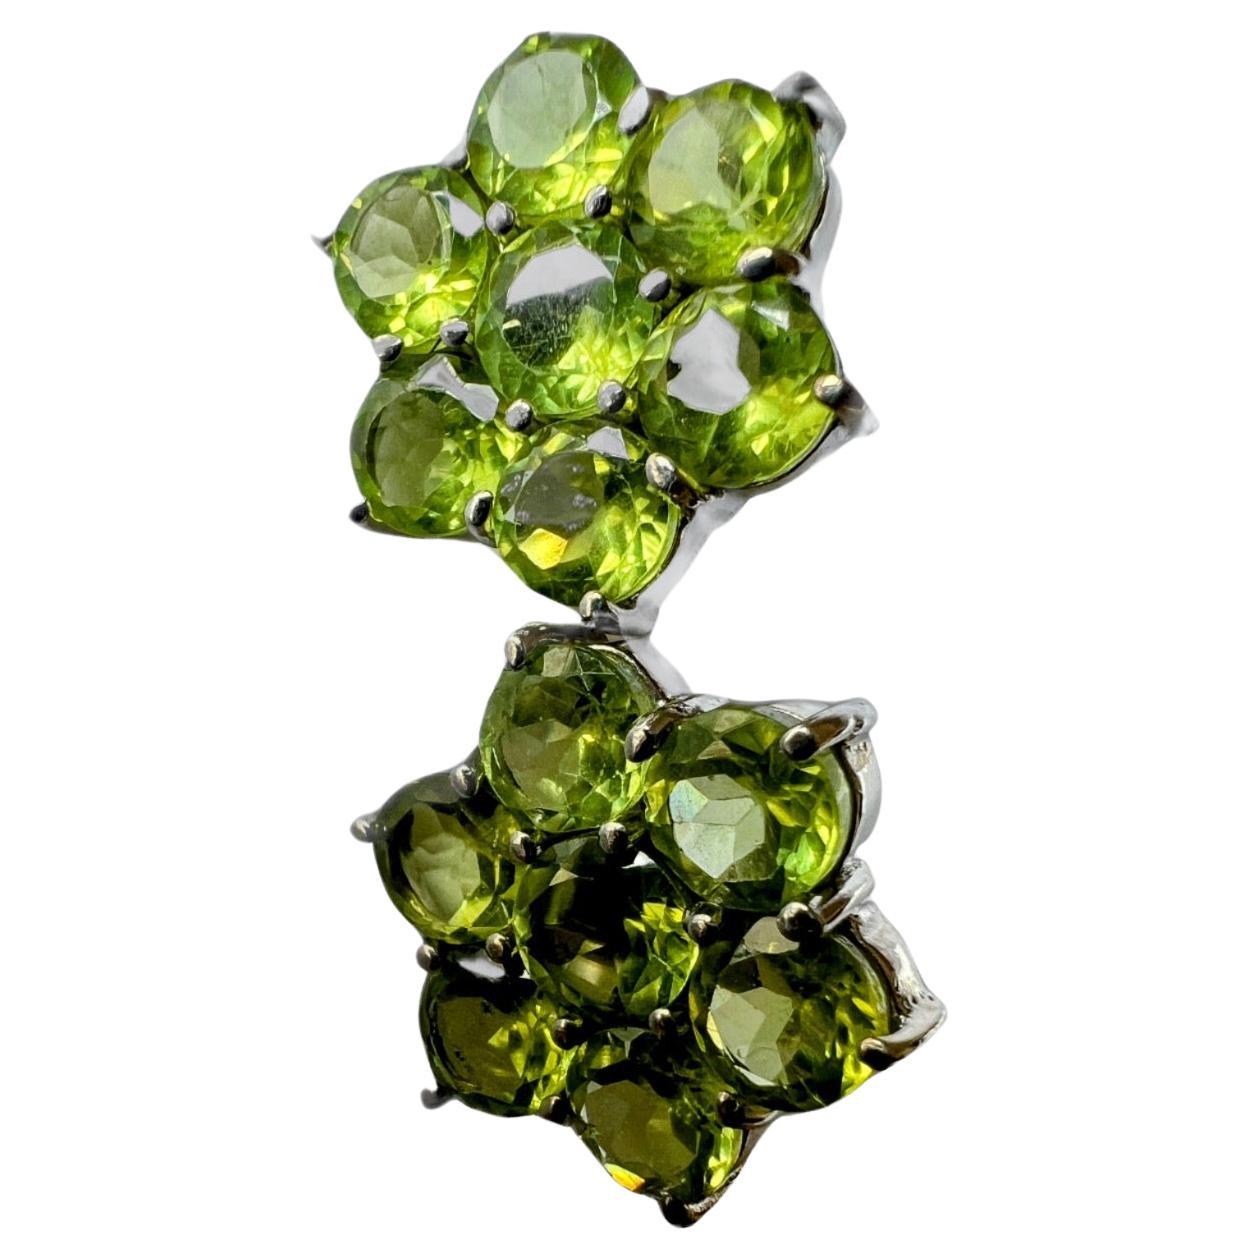 This Mint Green Peridot Stud Earrings on platinum coated sterling silver is a delicate and charming addition to your jewelry collection. 
These earrings feature seven brilliant round-cut peridot gemstones, each measuring 0.75 carats, set in a